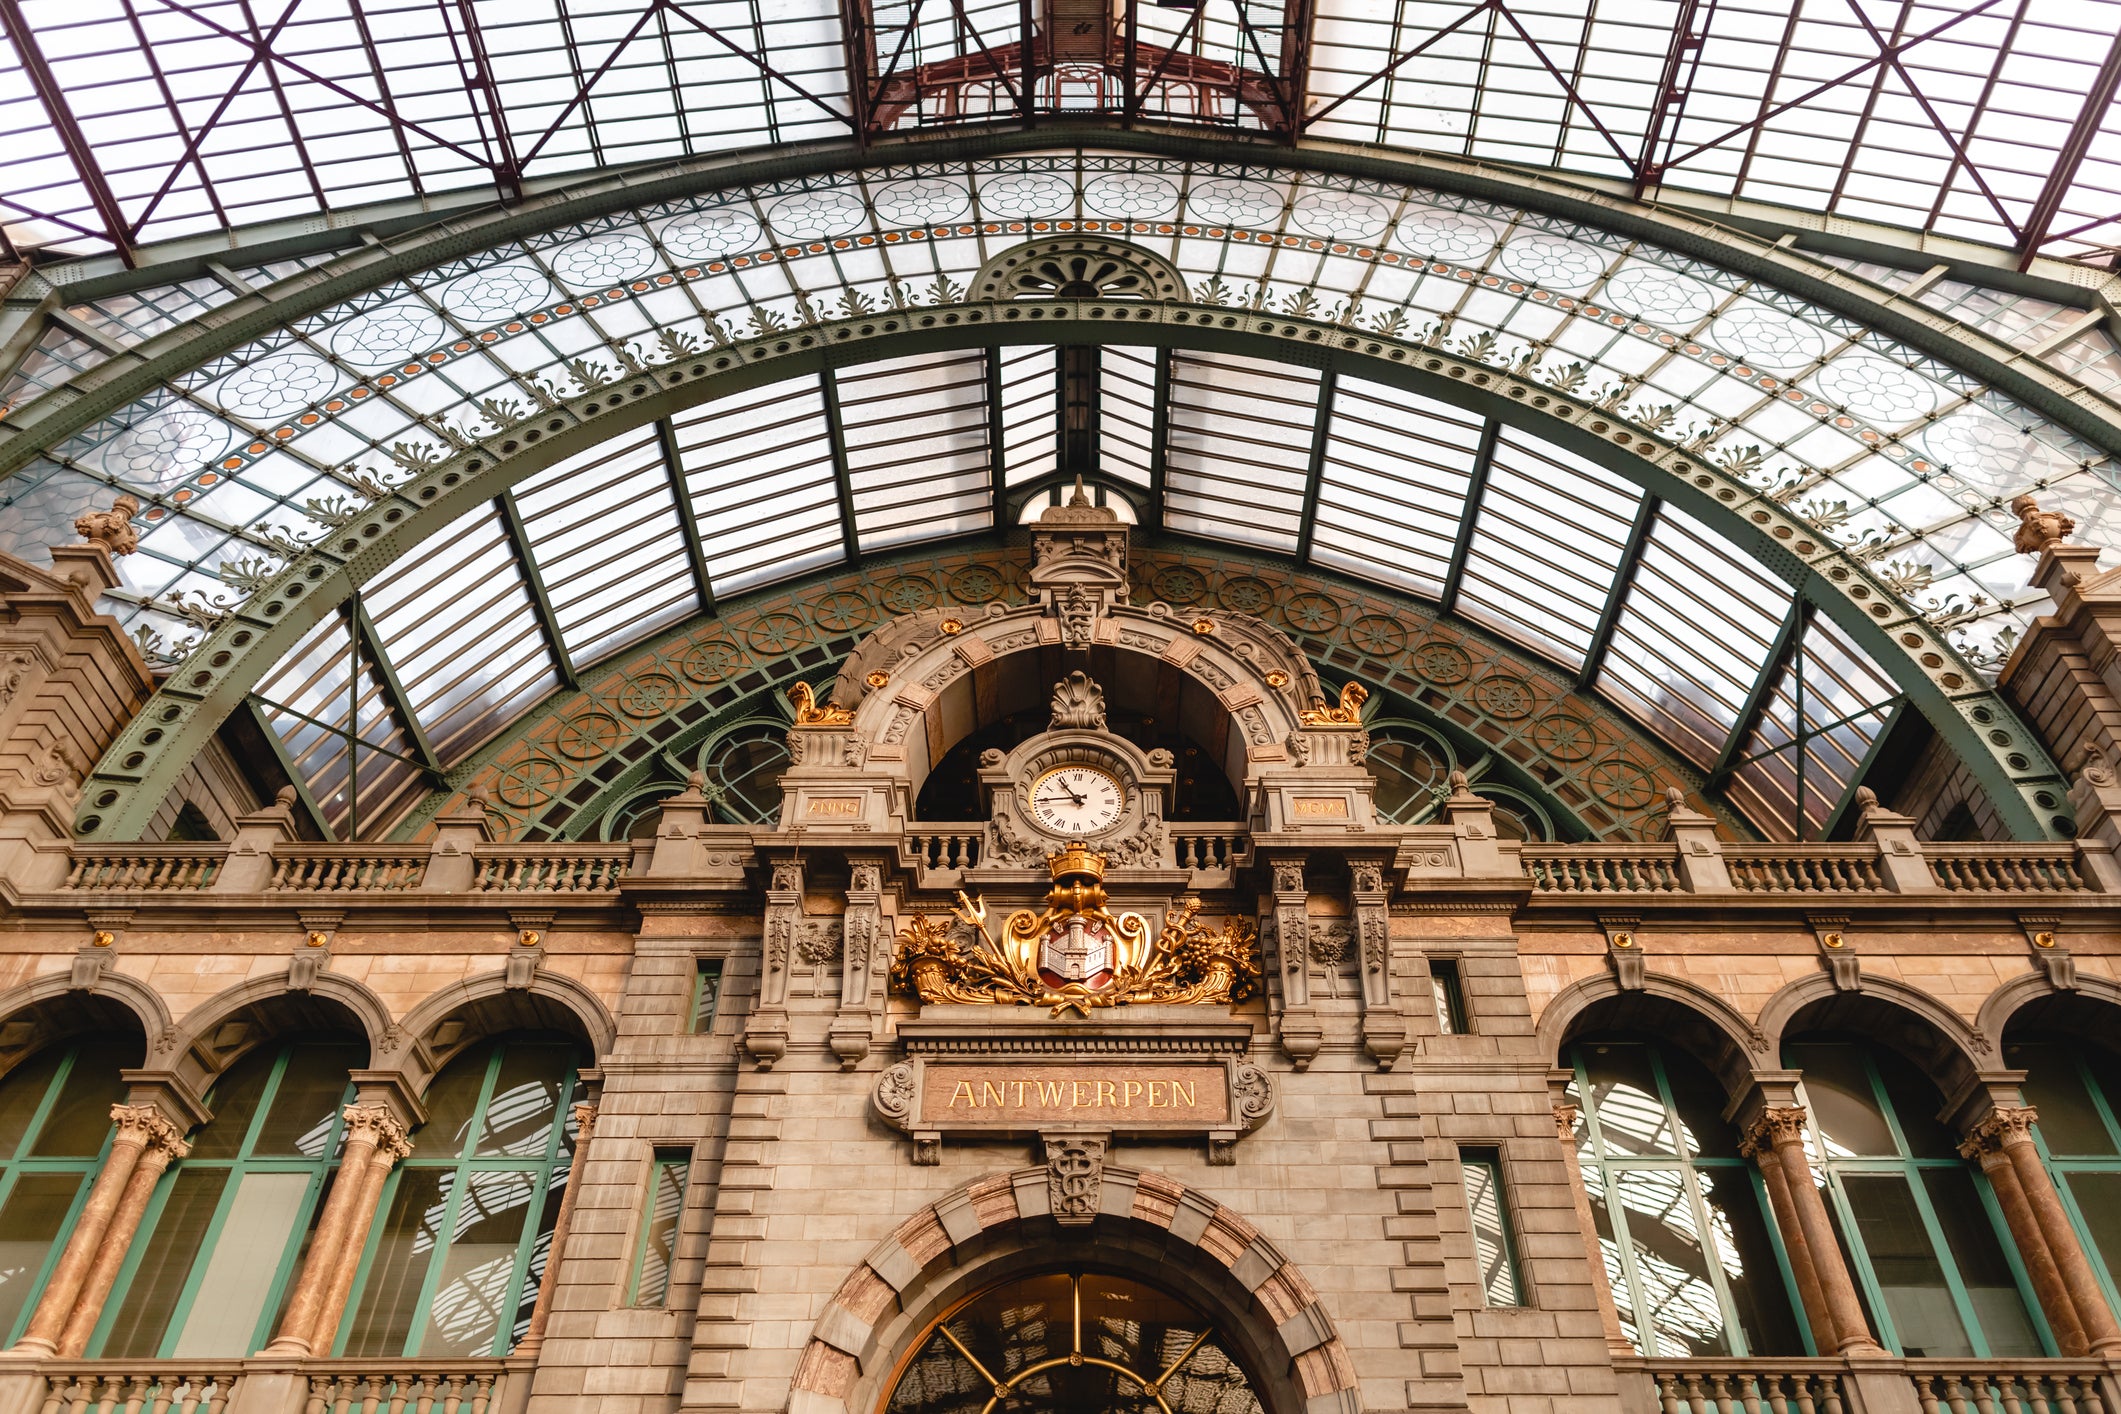 Antwerpen-Centraal, one of the world’s most beautiful stations (Getty/iStock)